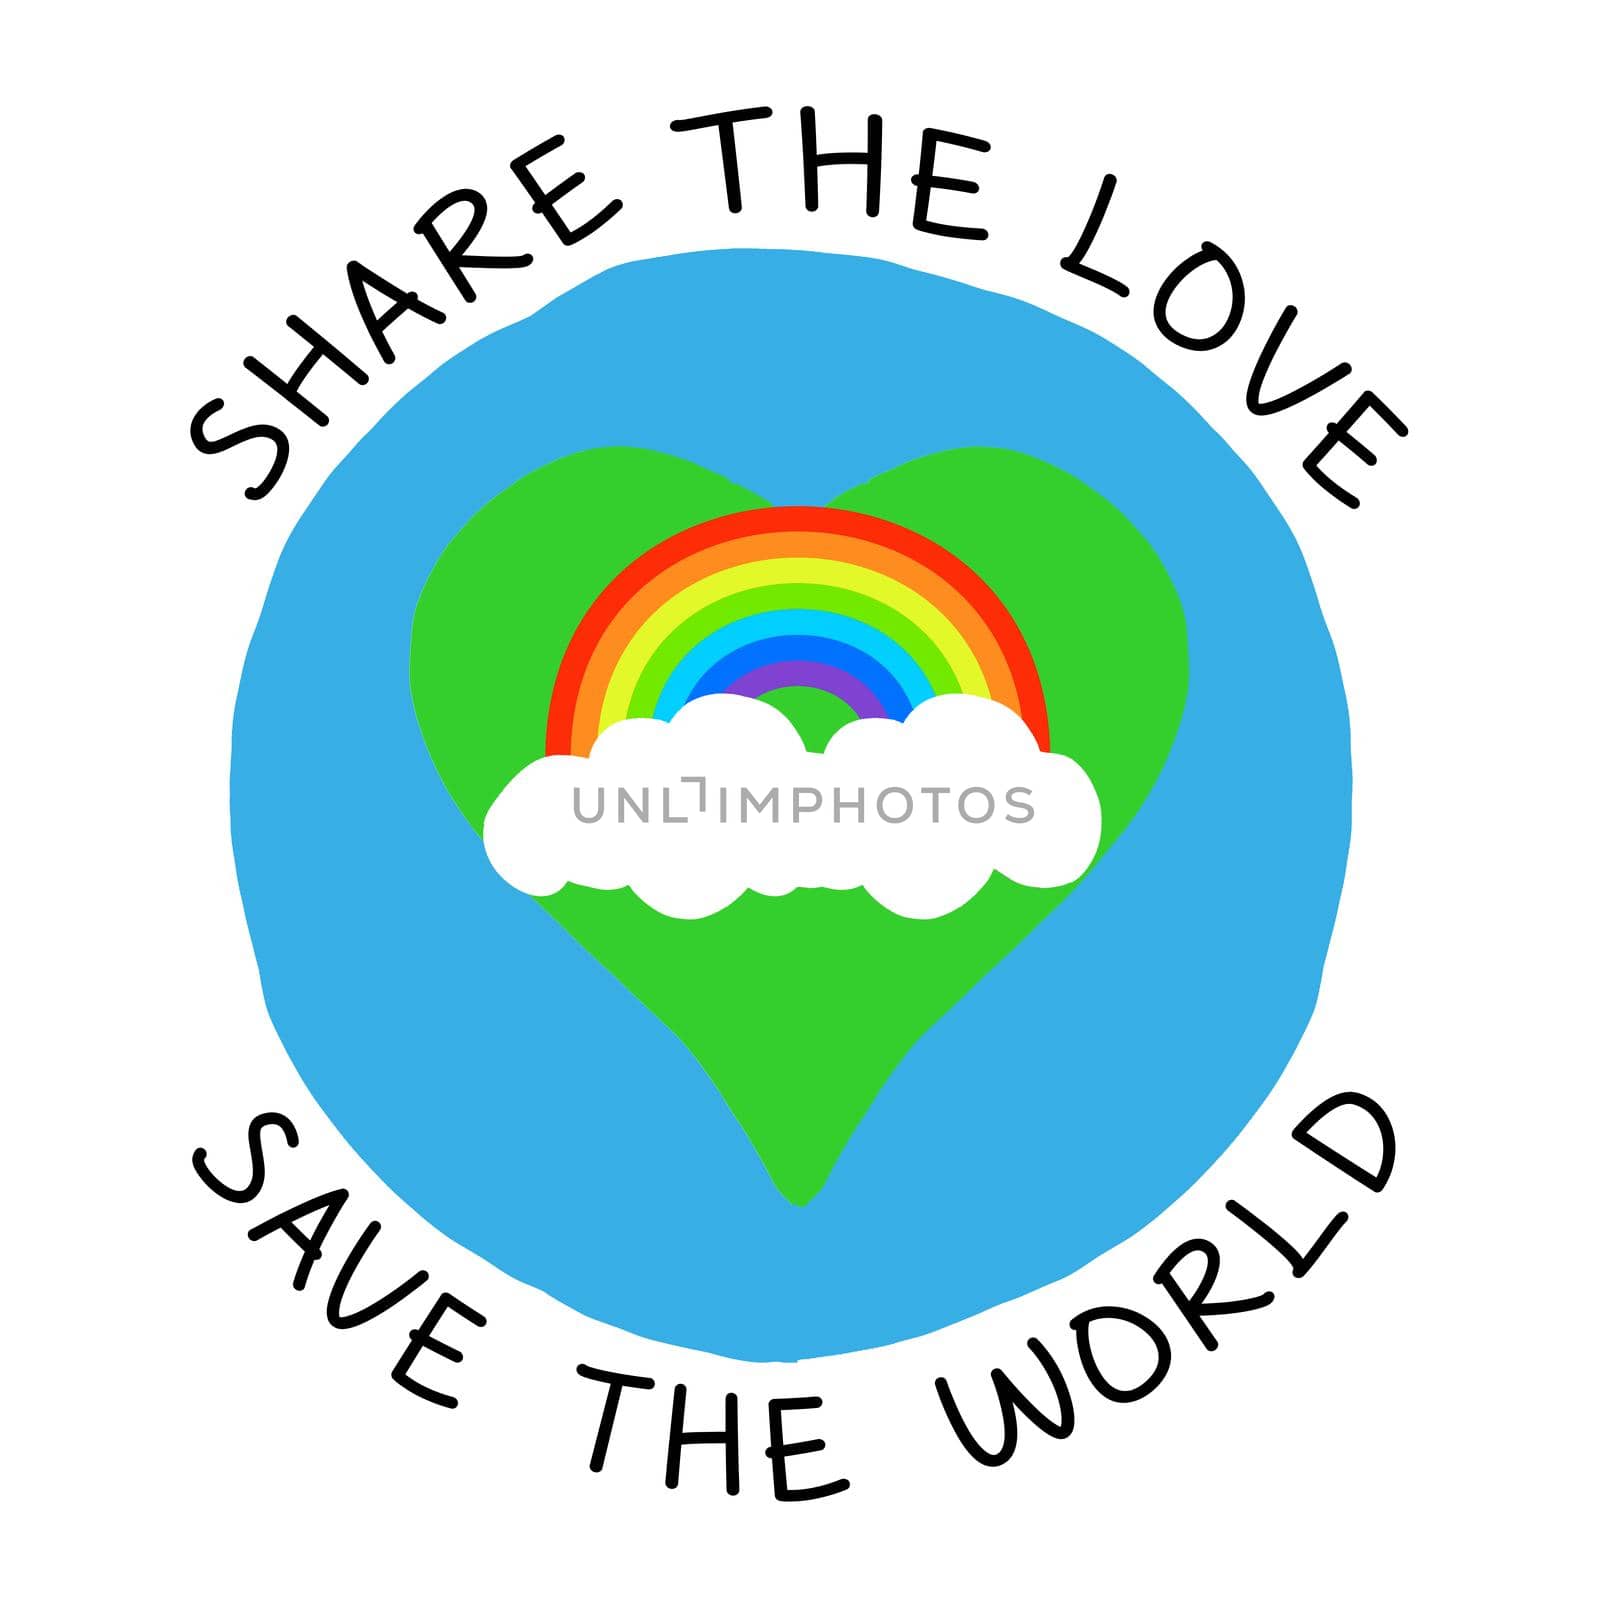 A round planet with a love heart shape country with the text "Share the love save the world".